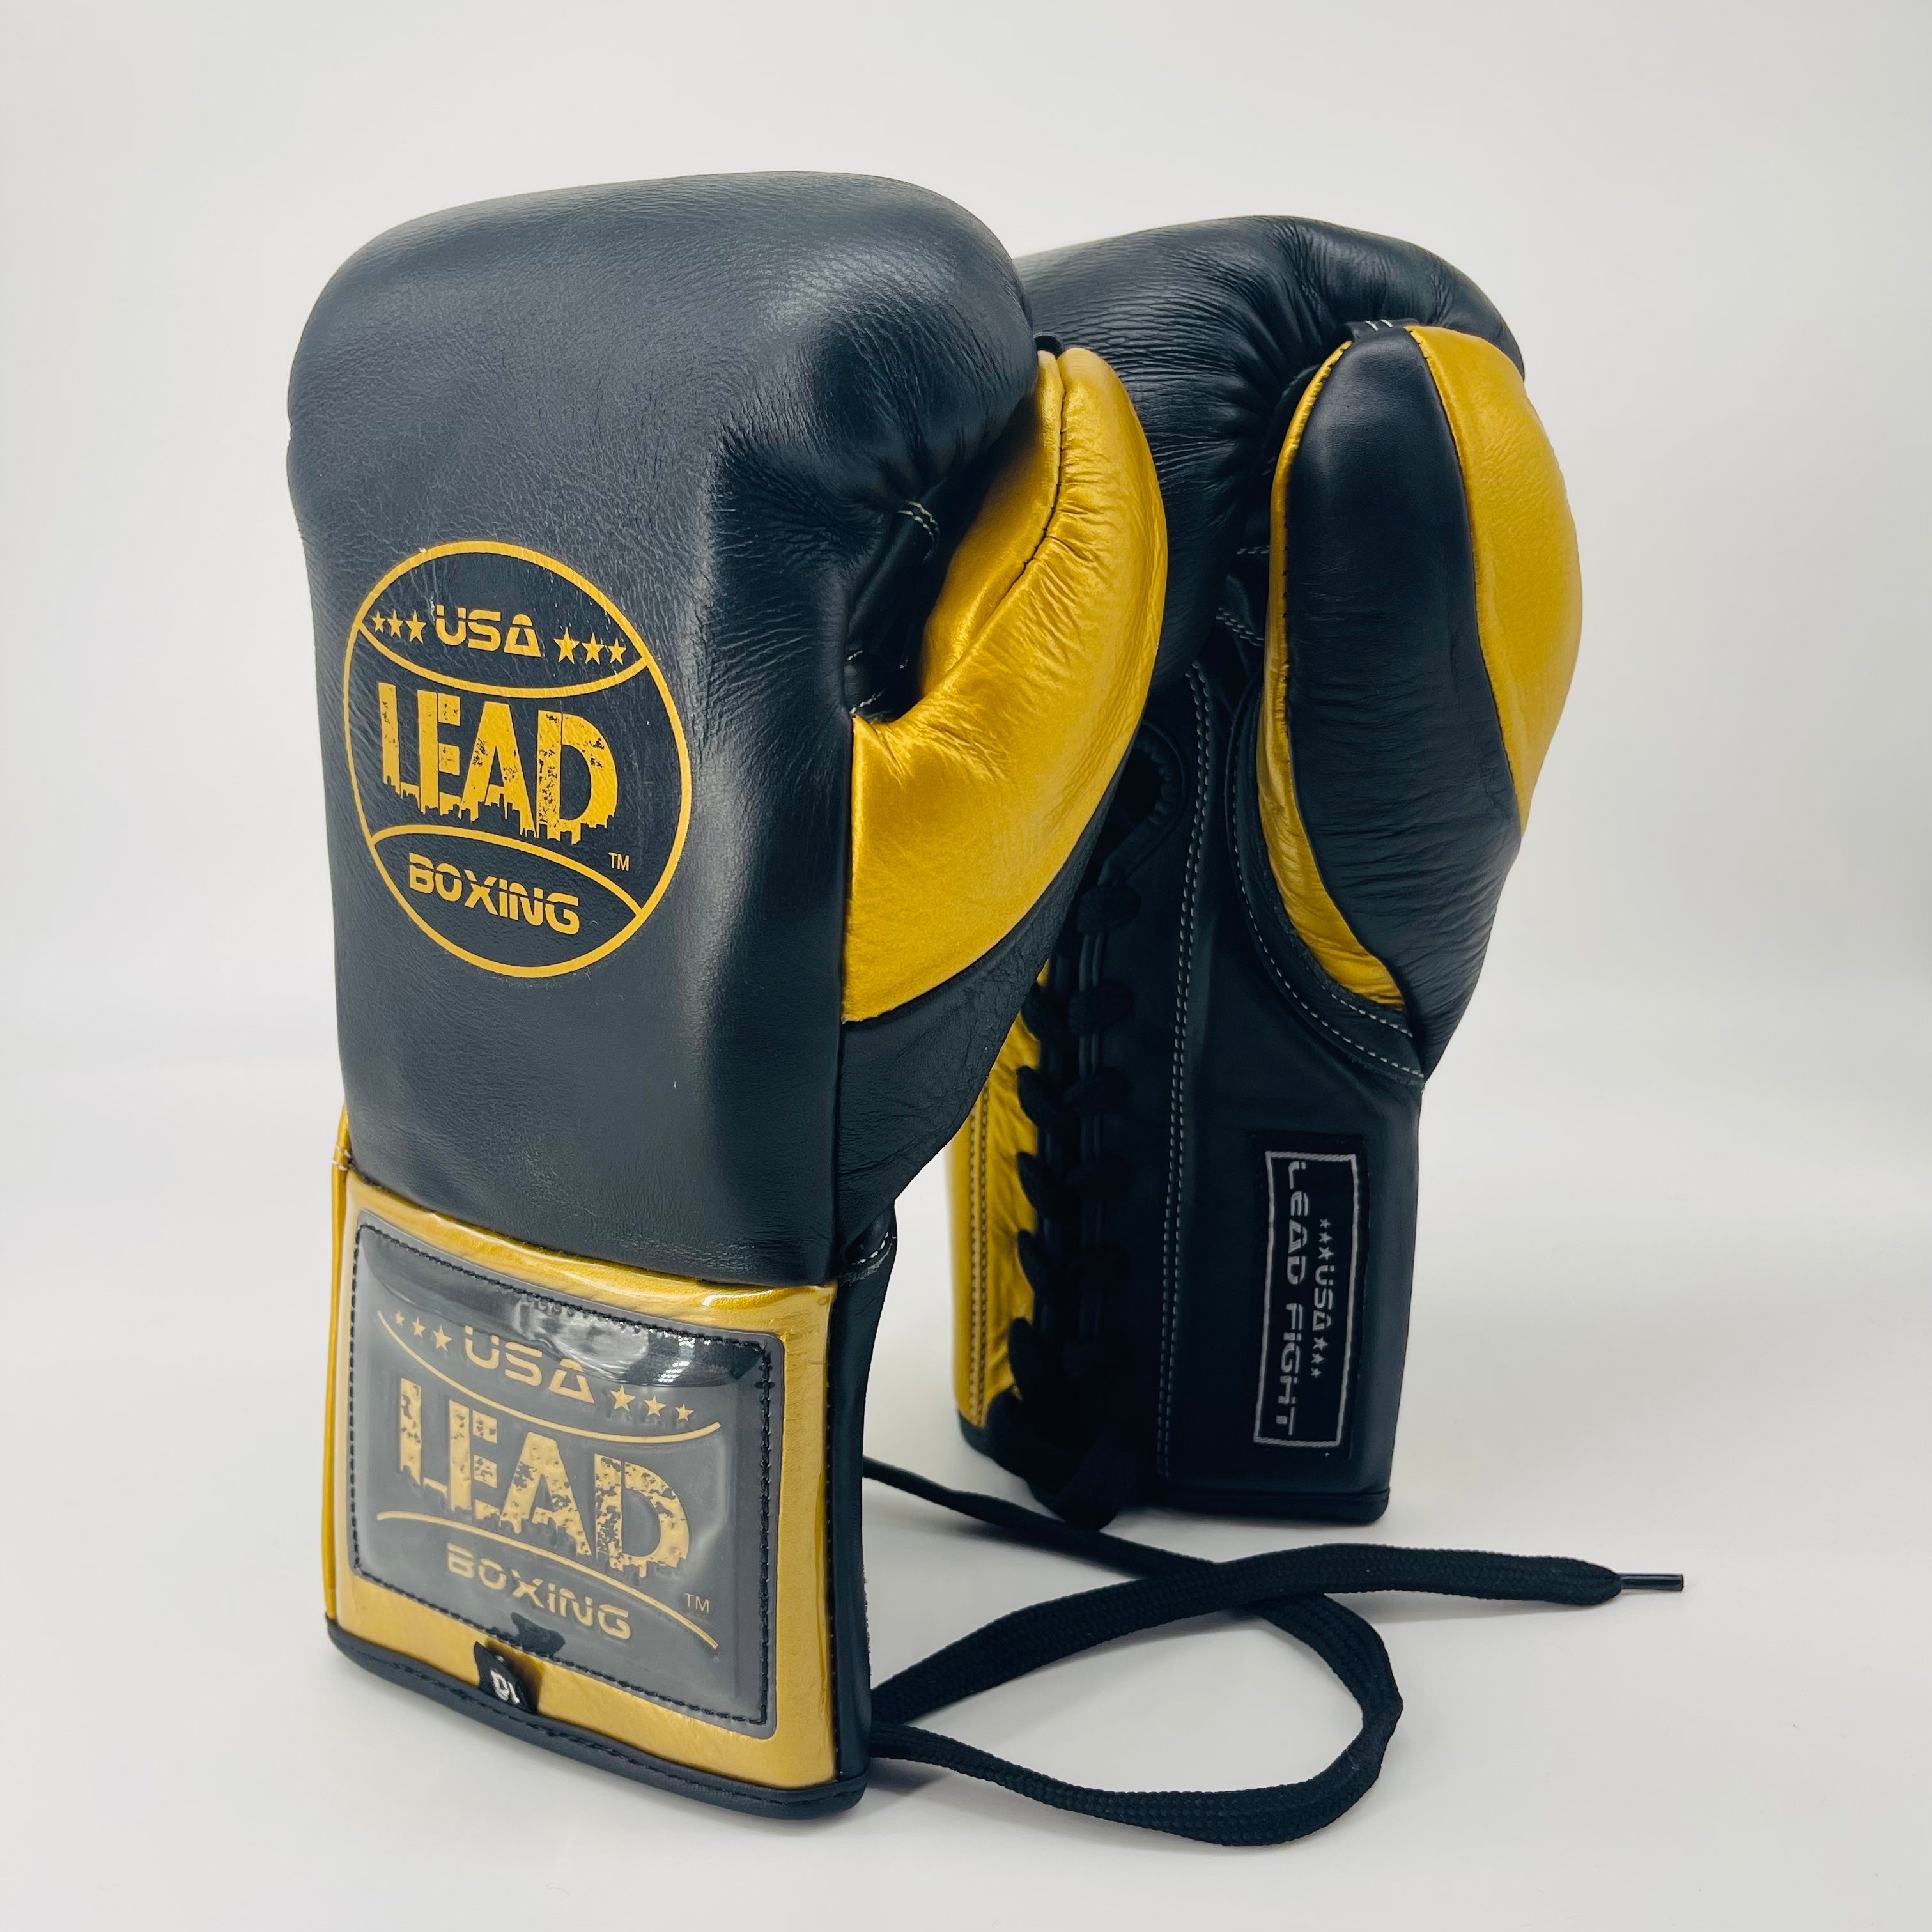 LEAD Boxing Fight Gloves (Black/Gold)